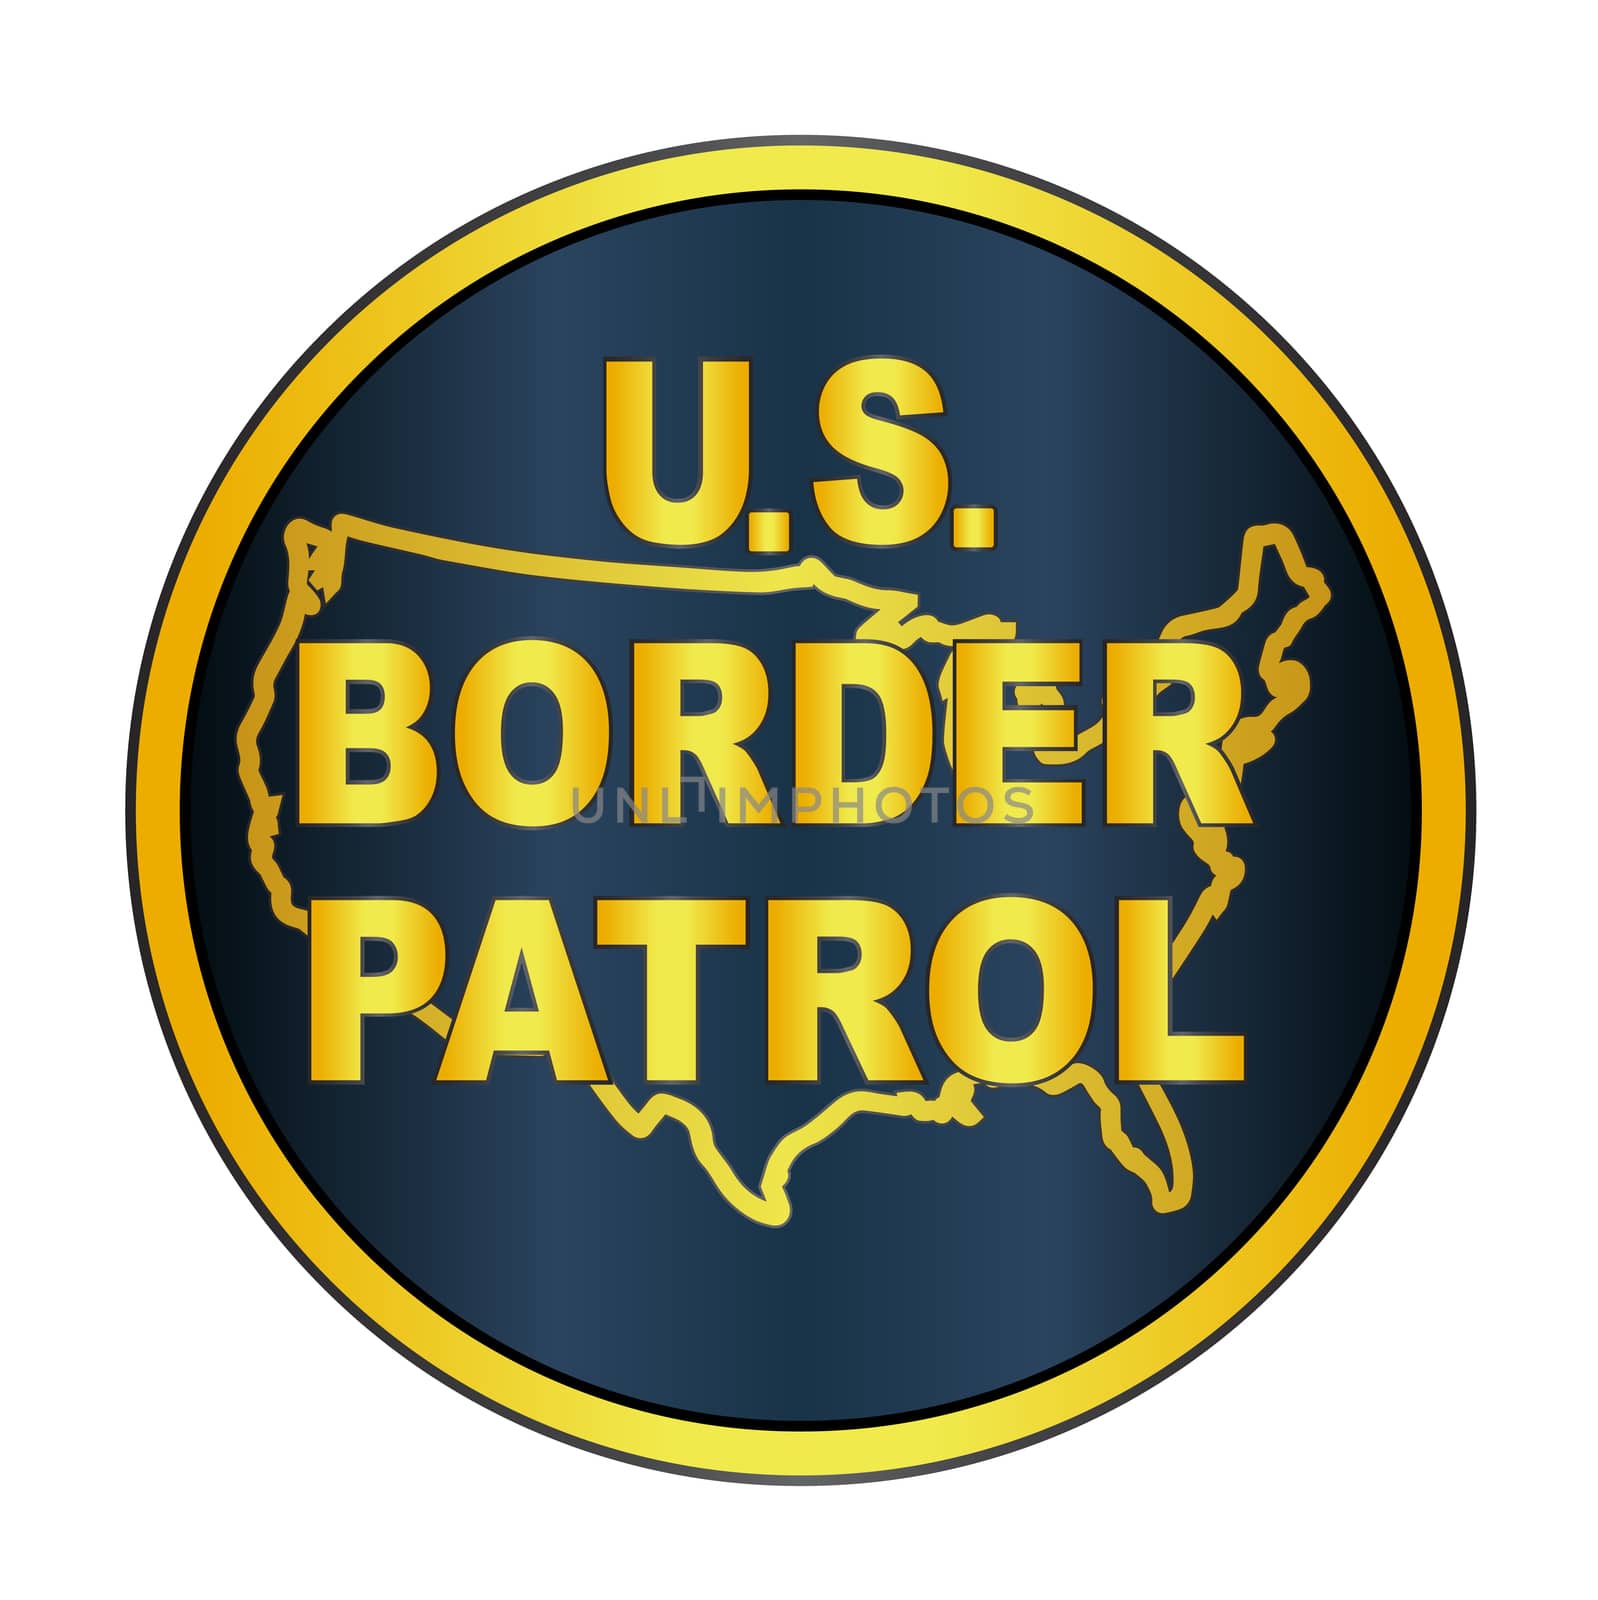 A depiction of the United States Border Control button